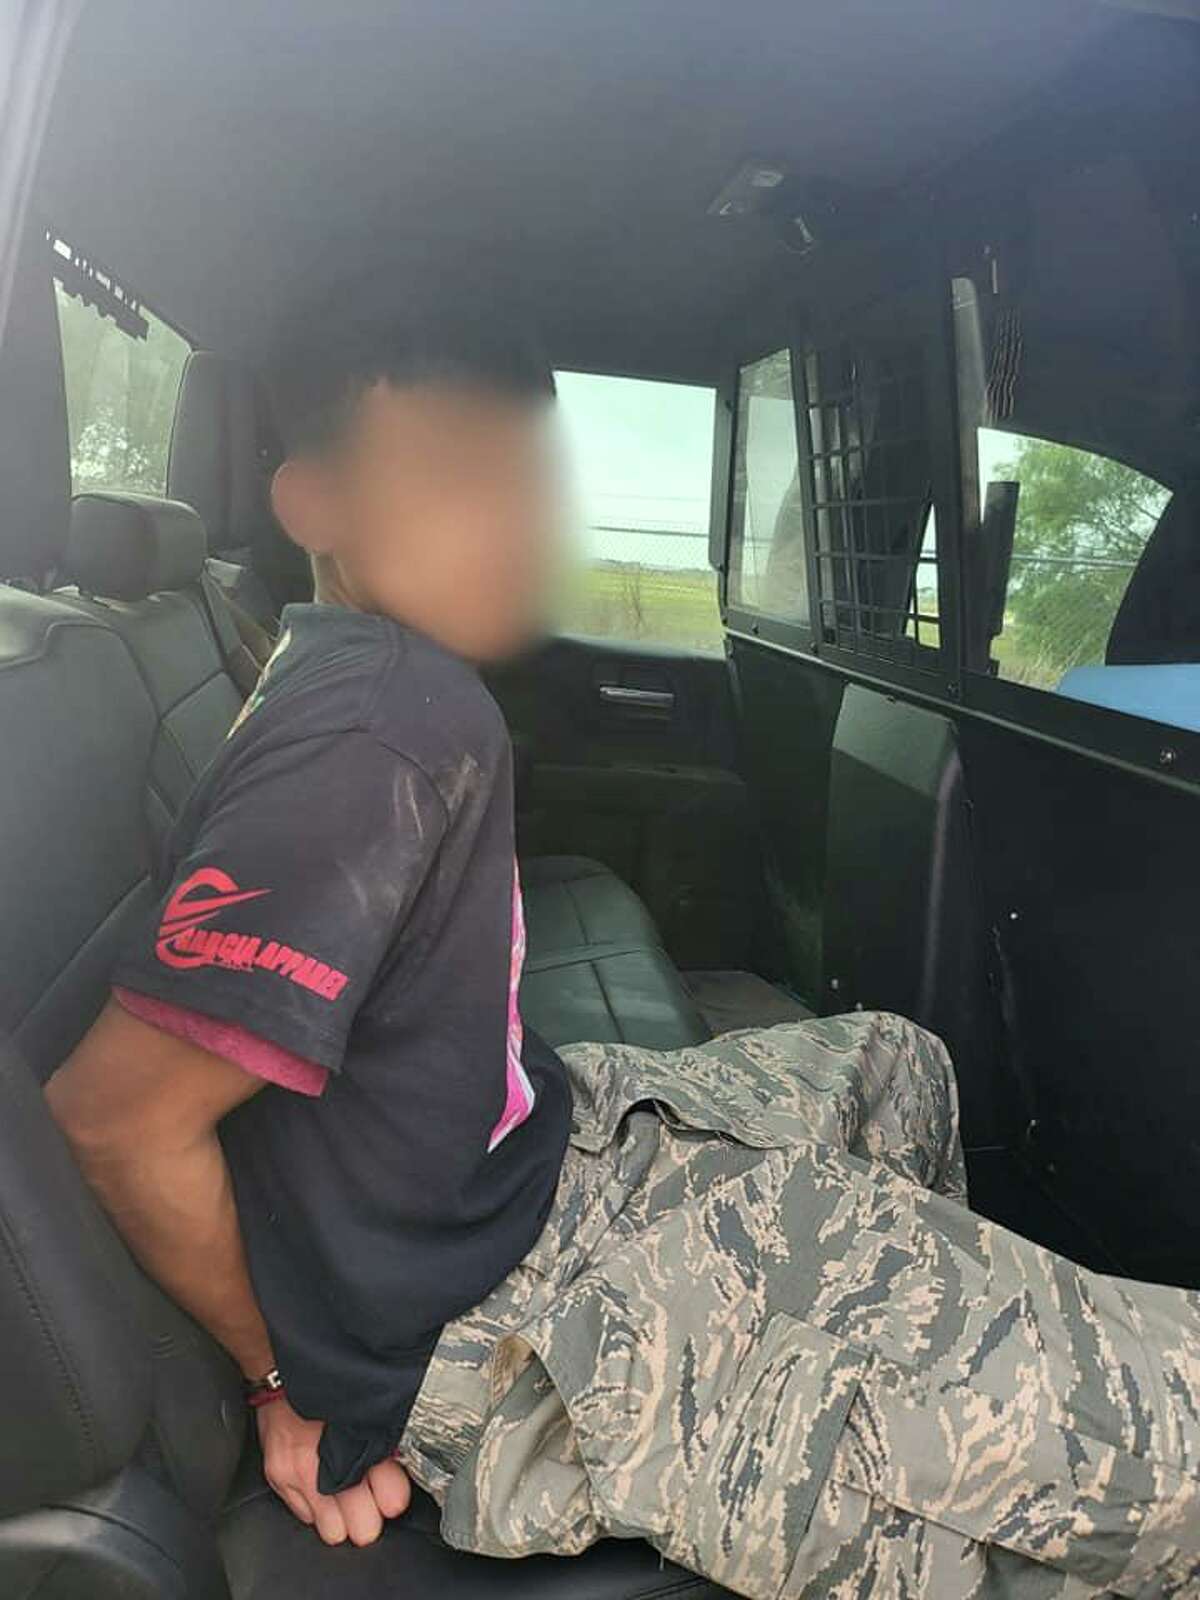 Atascosa County deputies arrested two teens after a lengthy pursuit Monday morning and planned to charge them with human smuggling and evading arrest.